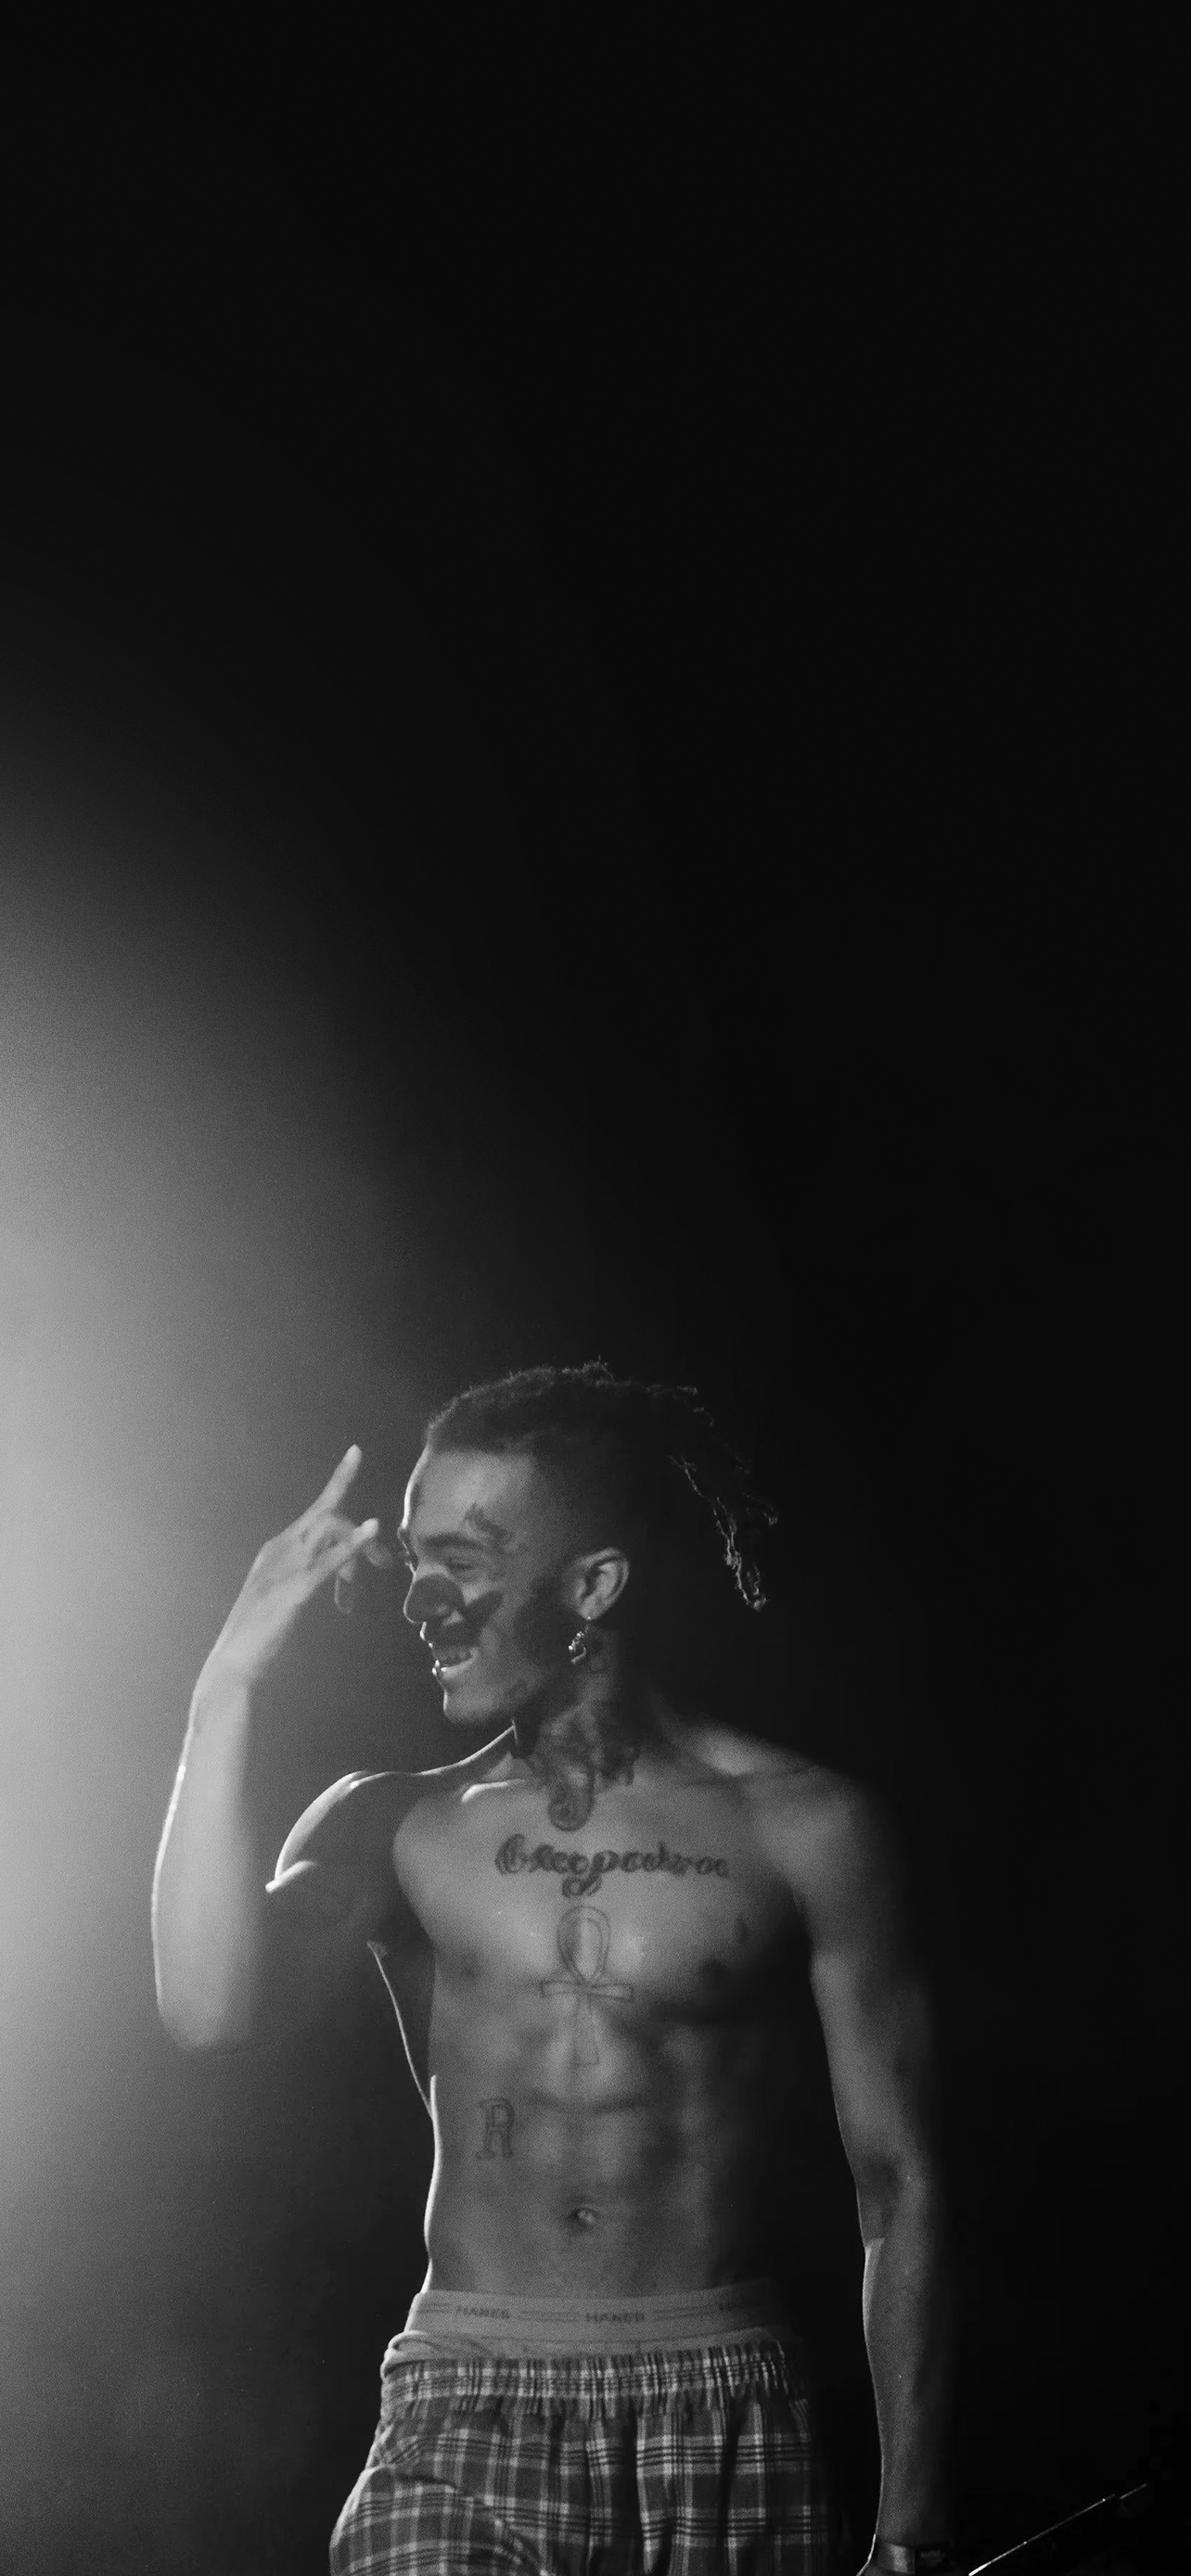 Some of the phone wallpaper y'all requested